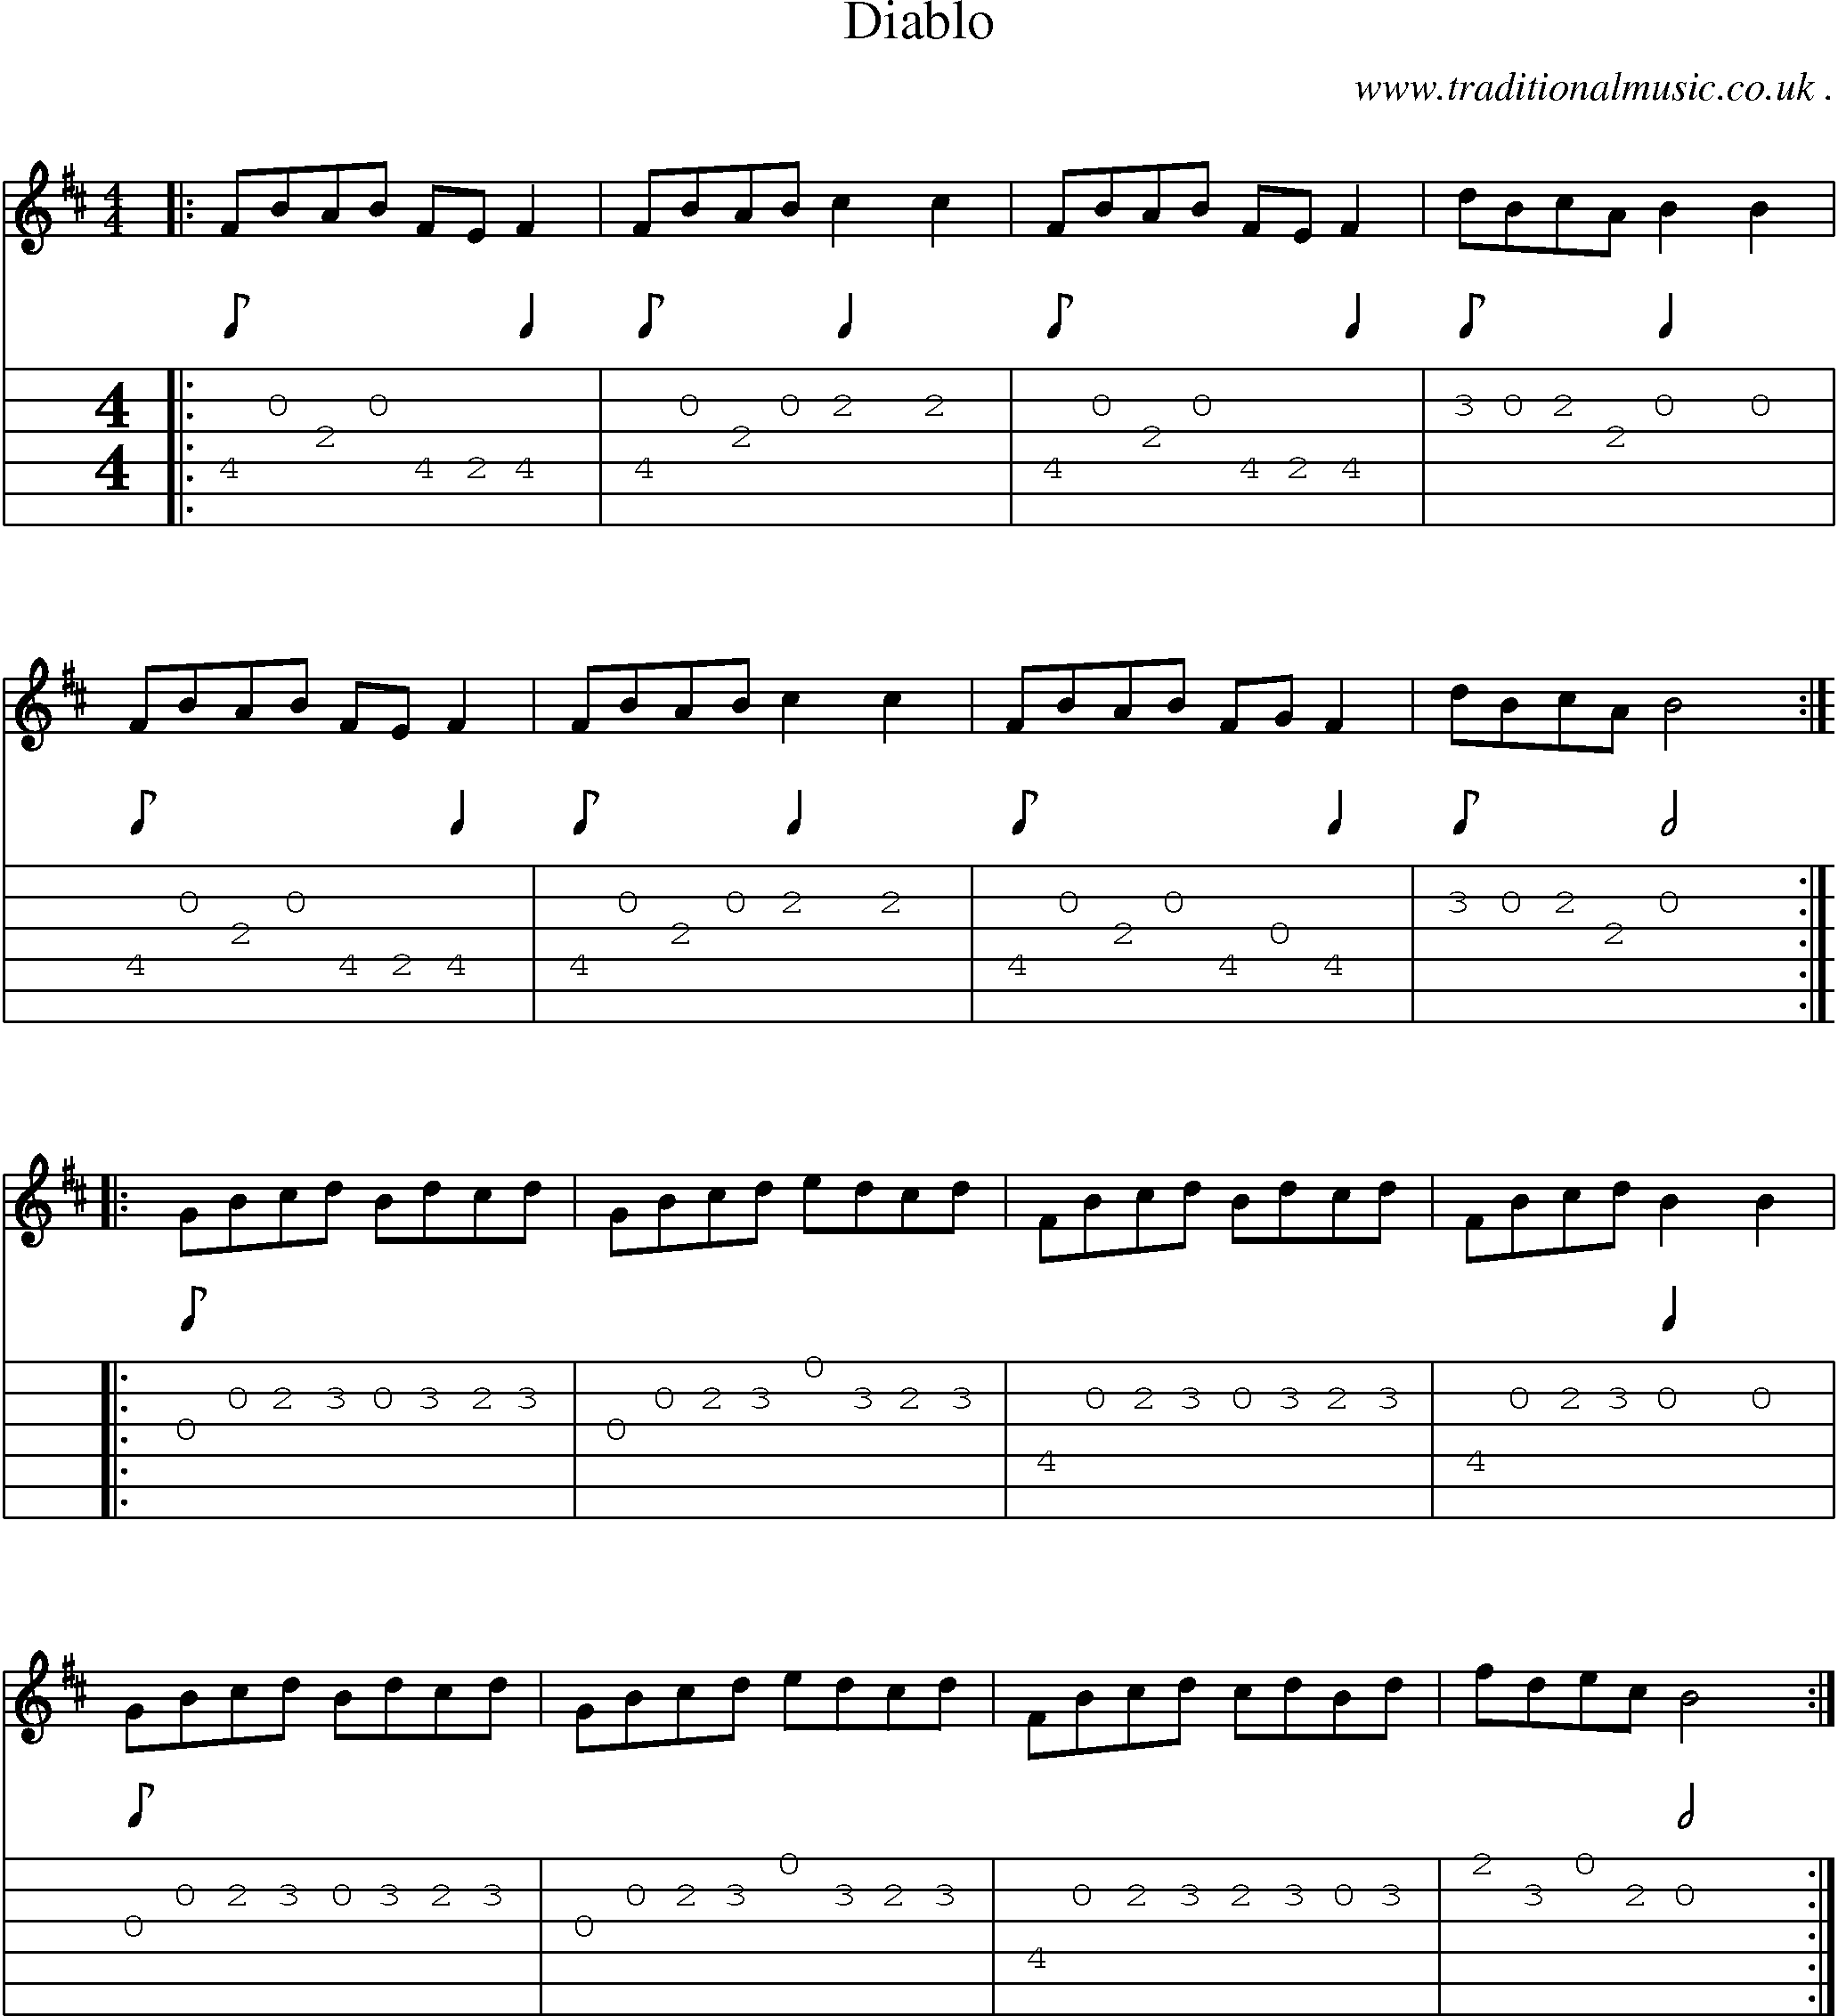 Sheet-Music and Guitar Tabs for Diablo